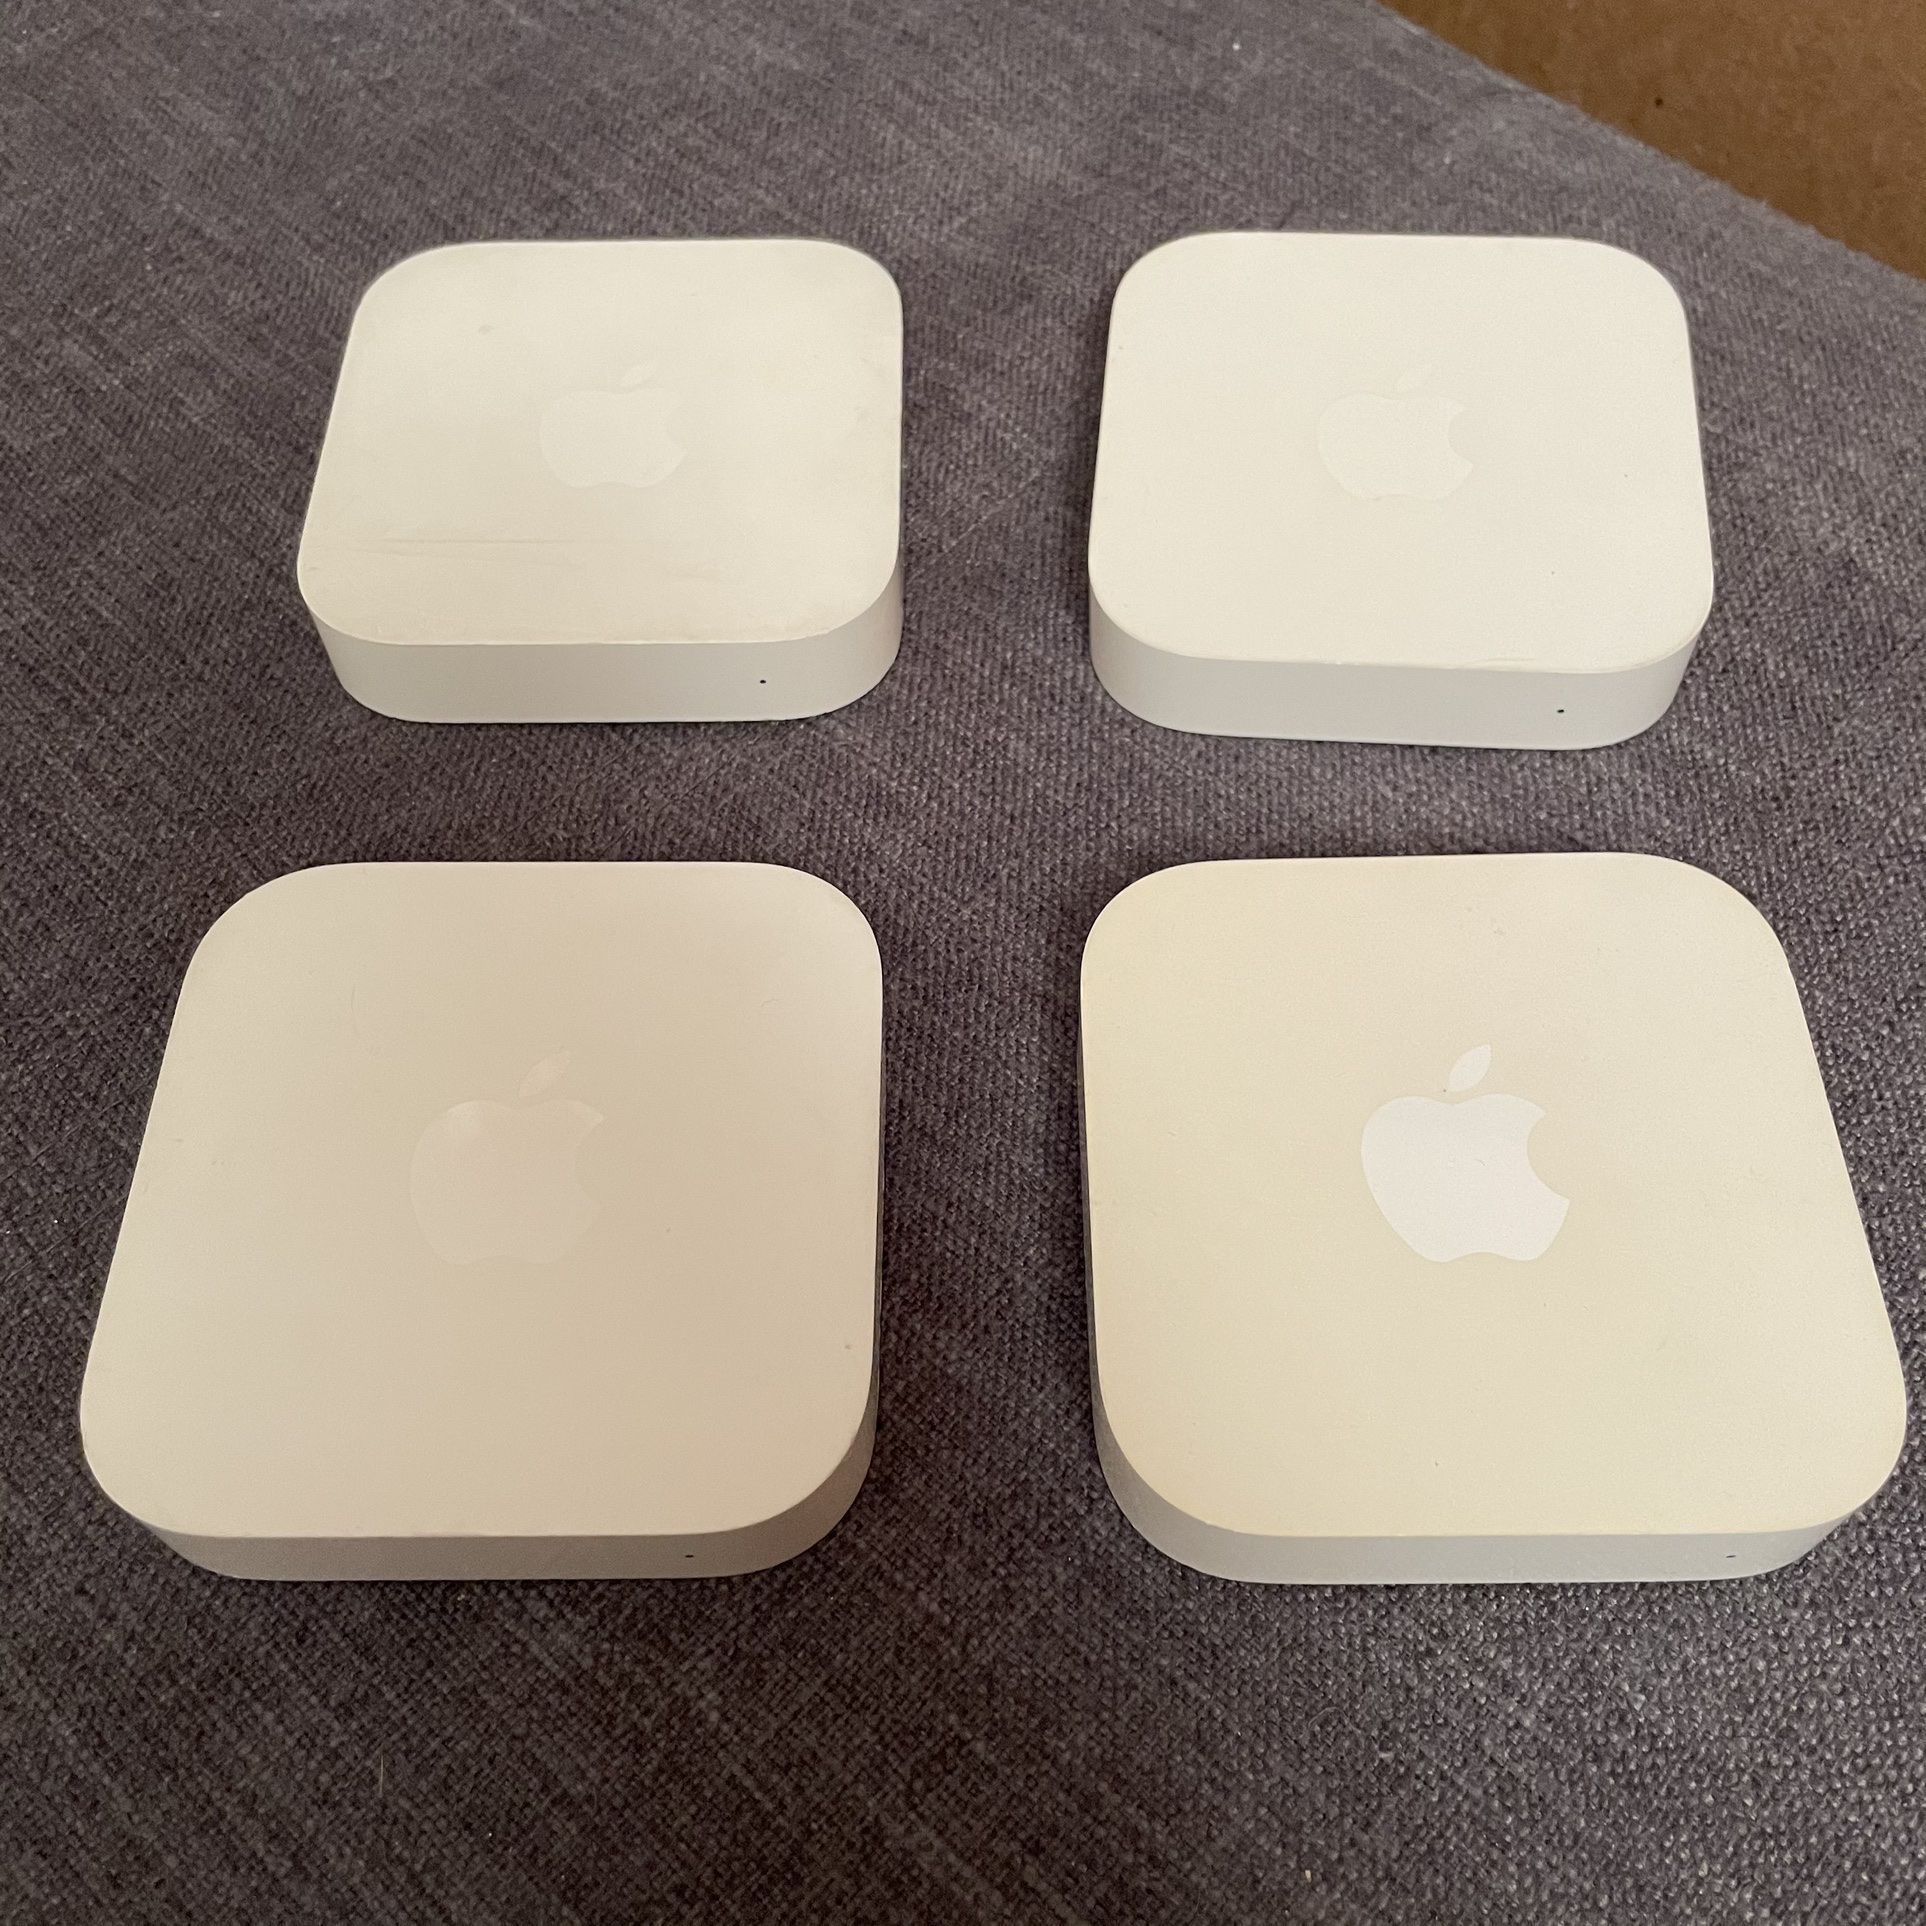 Apple AirPort Express WiFi Router for AirPlay 2 (A1392)